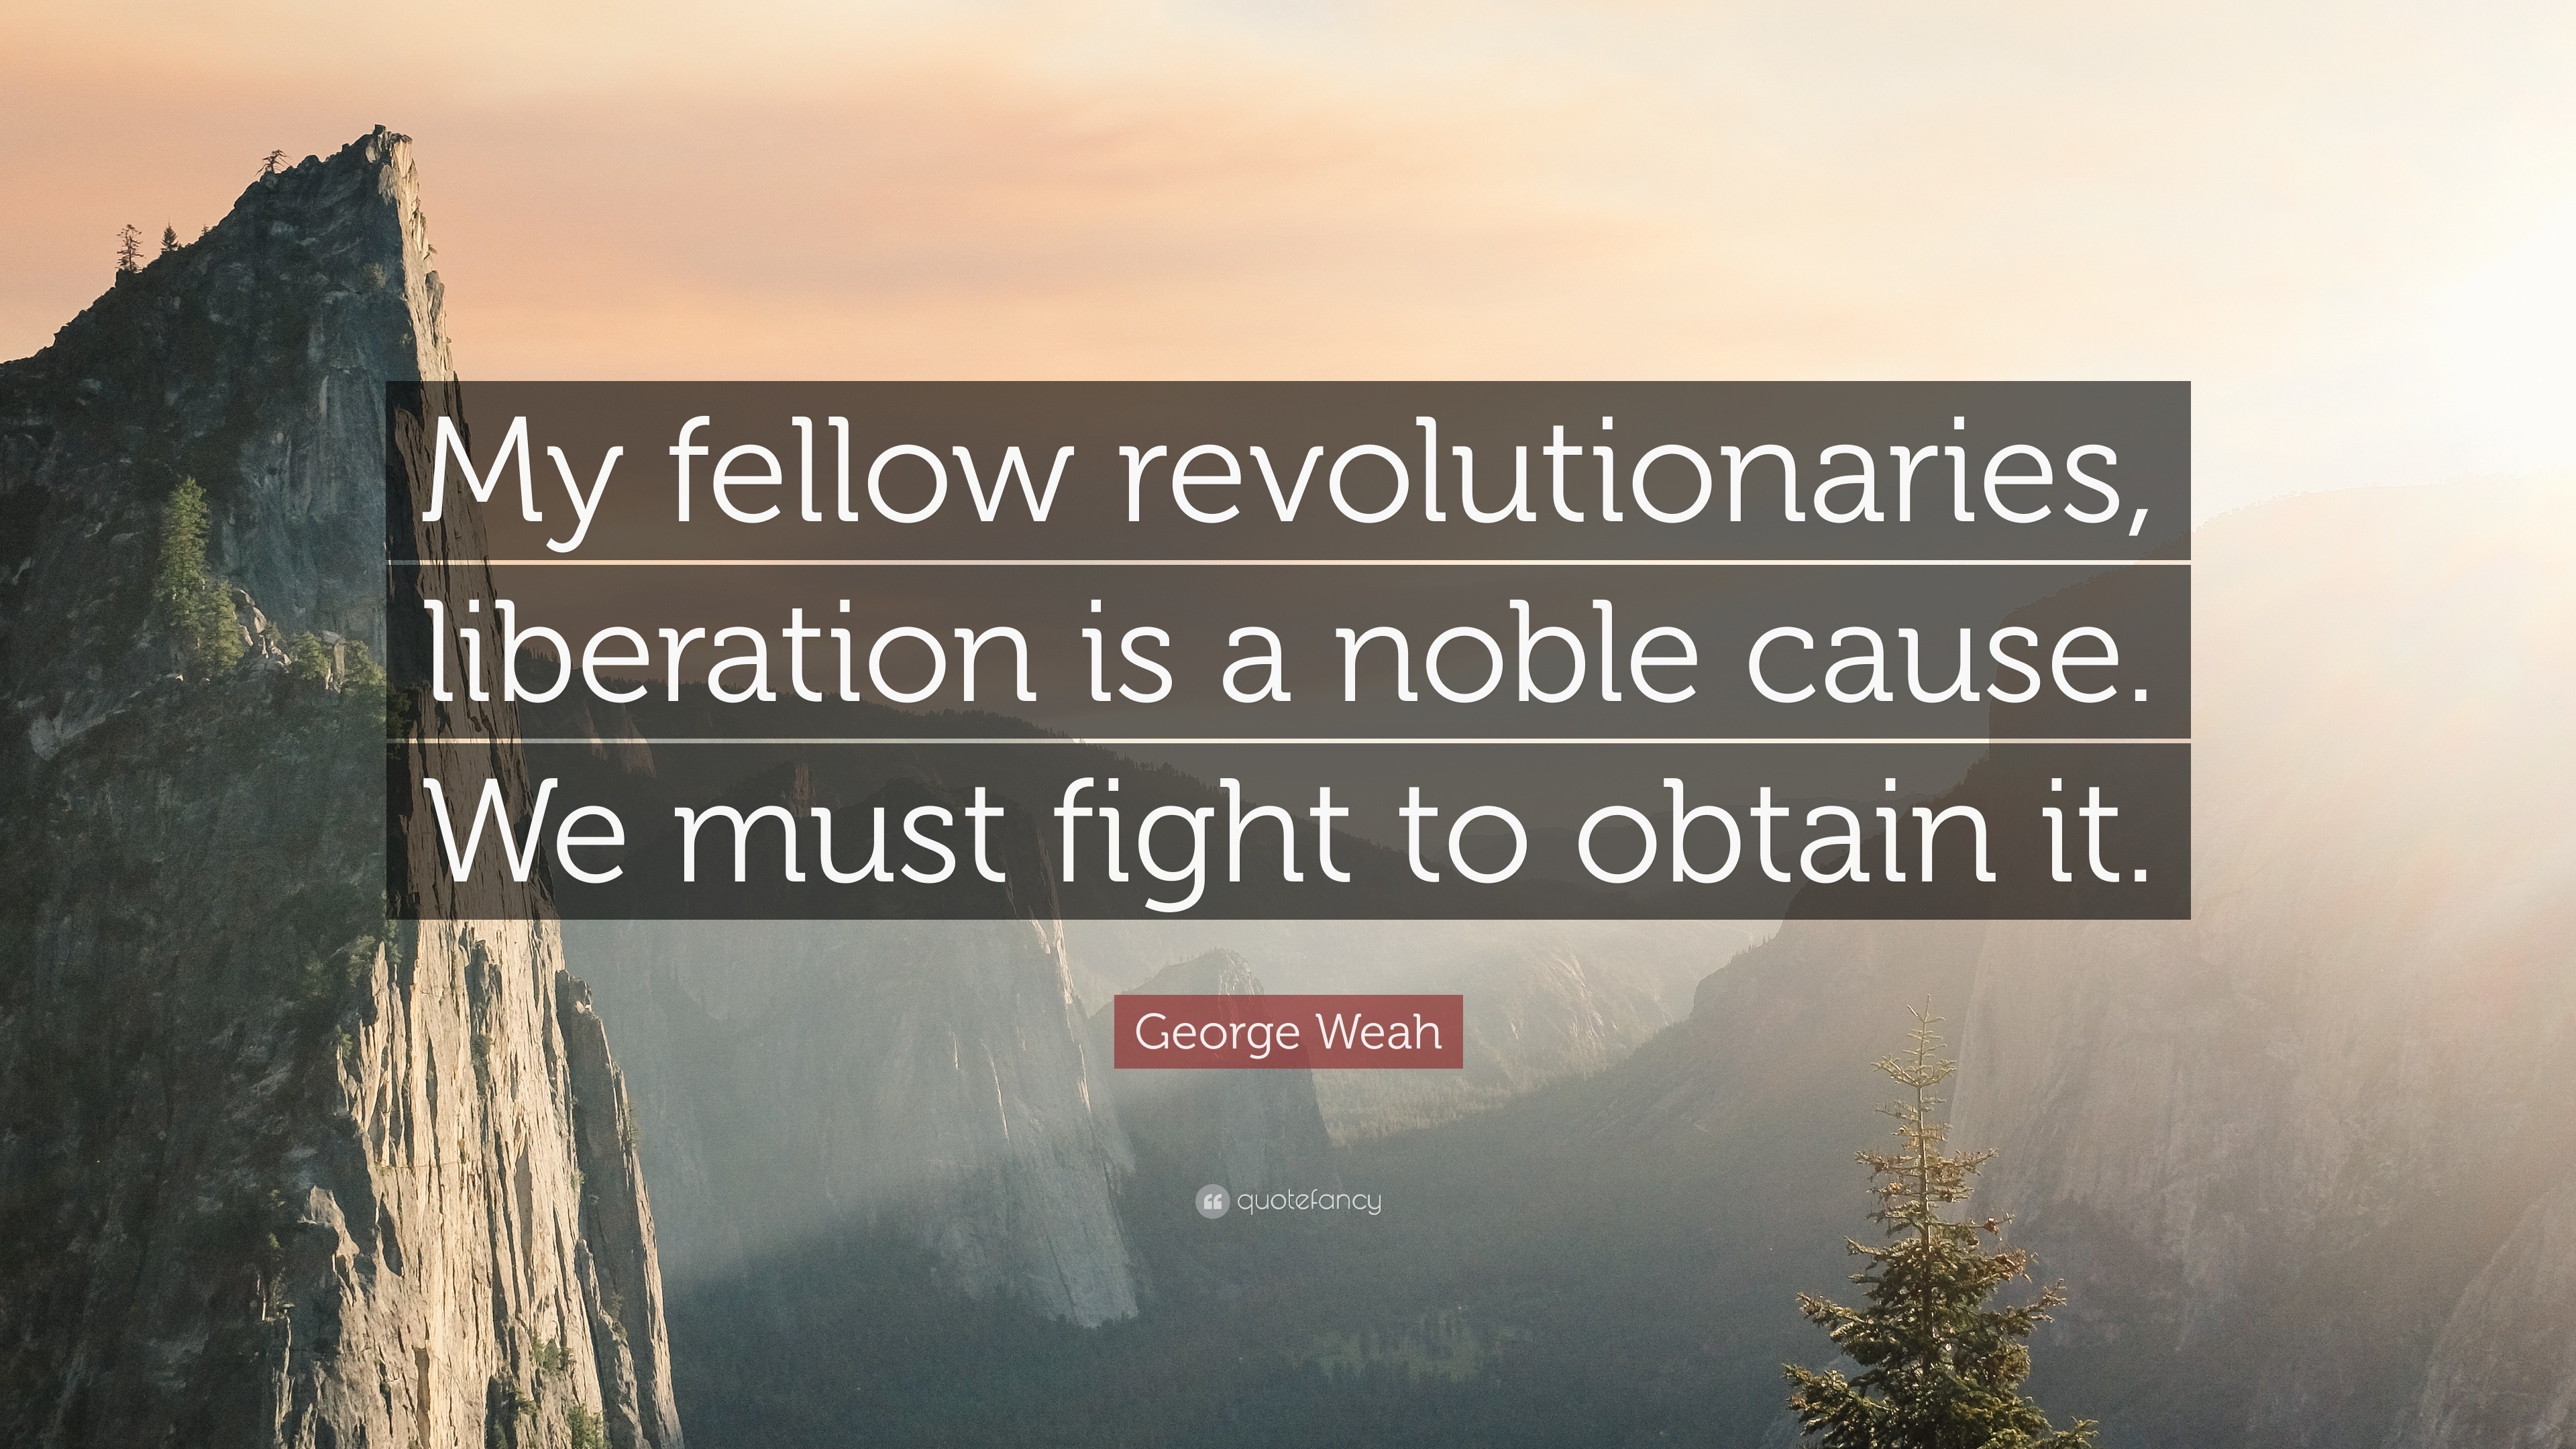 George Weah Quote: “My fellow revolutionaries, liberation is a noble